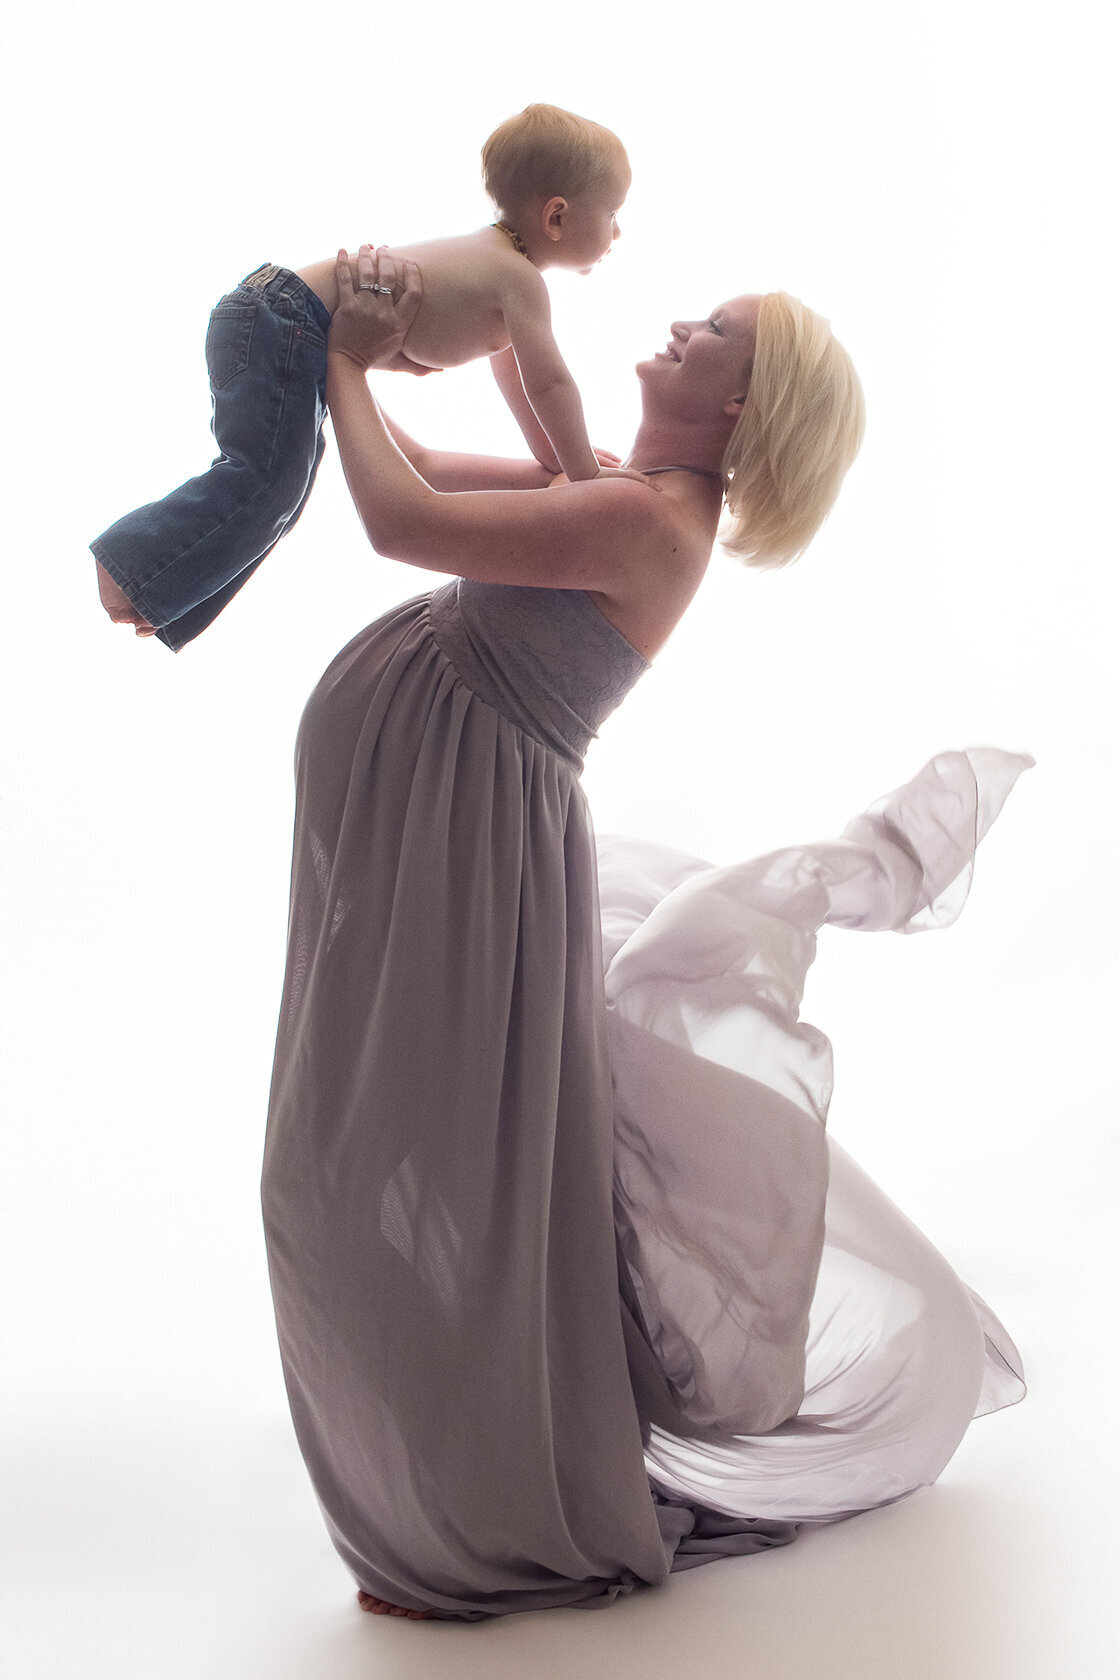 Blond pregnant woman hold up her toddler in this maternity portrait